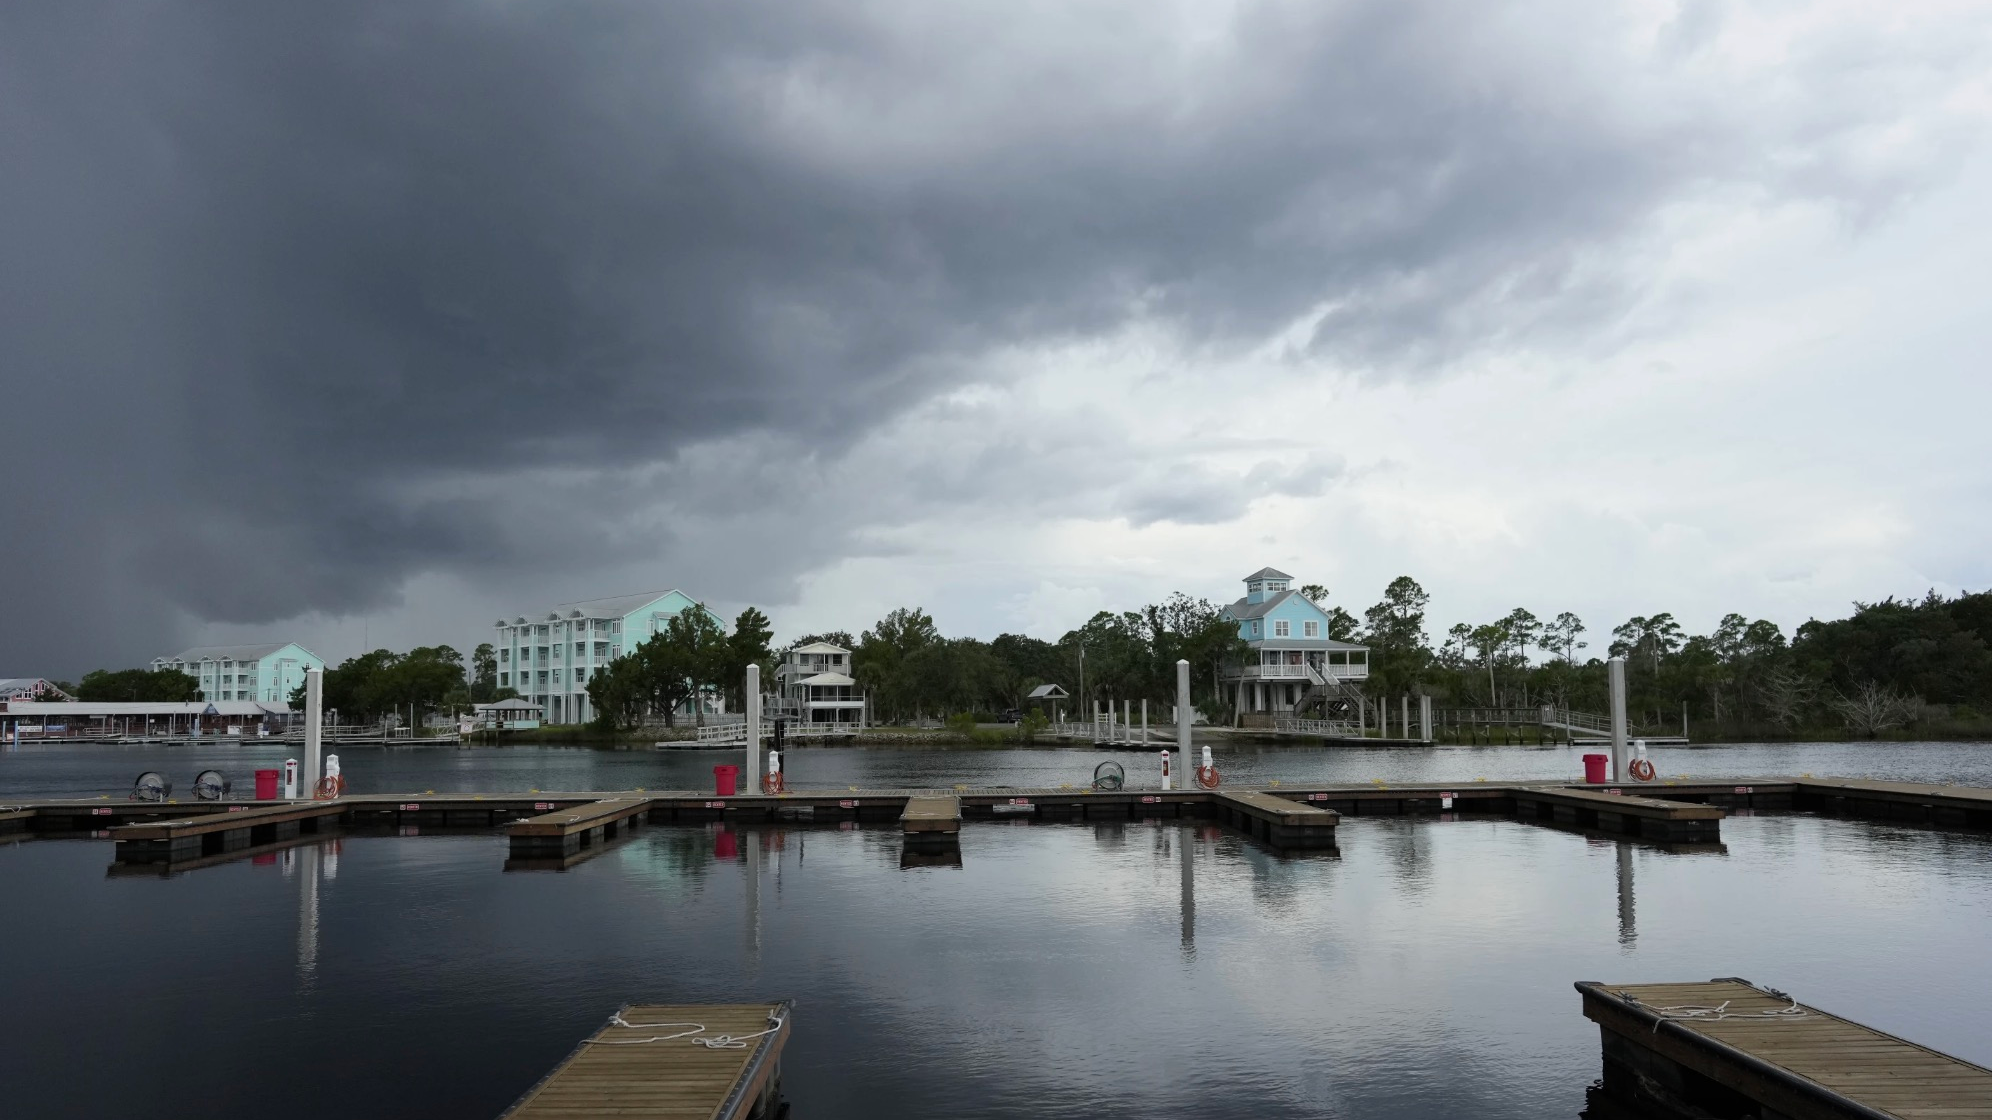 Storm clouds loom over riverfront homes ahead of the expected arrival of Hurricane ldalia in Steinhatchee, Florida, U.S., August 29, 2023. /AP